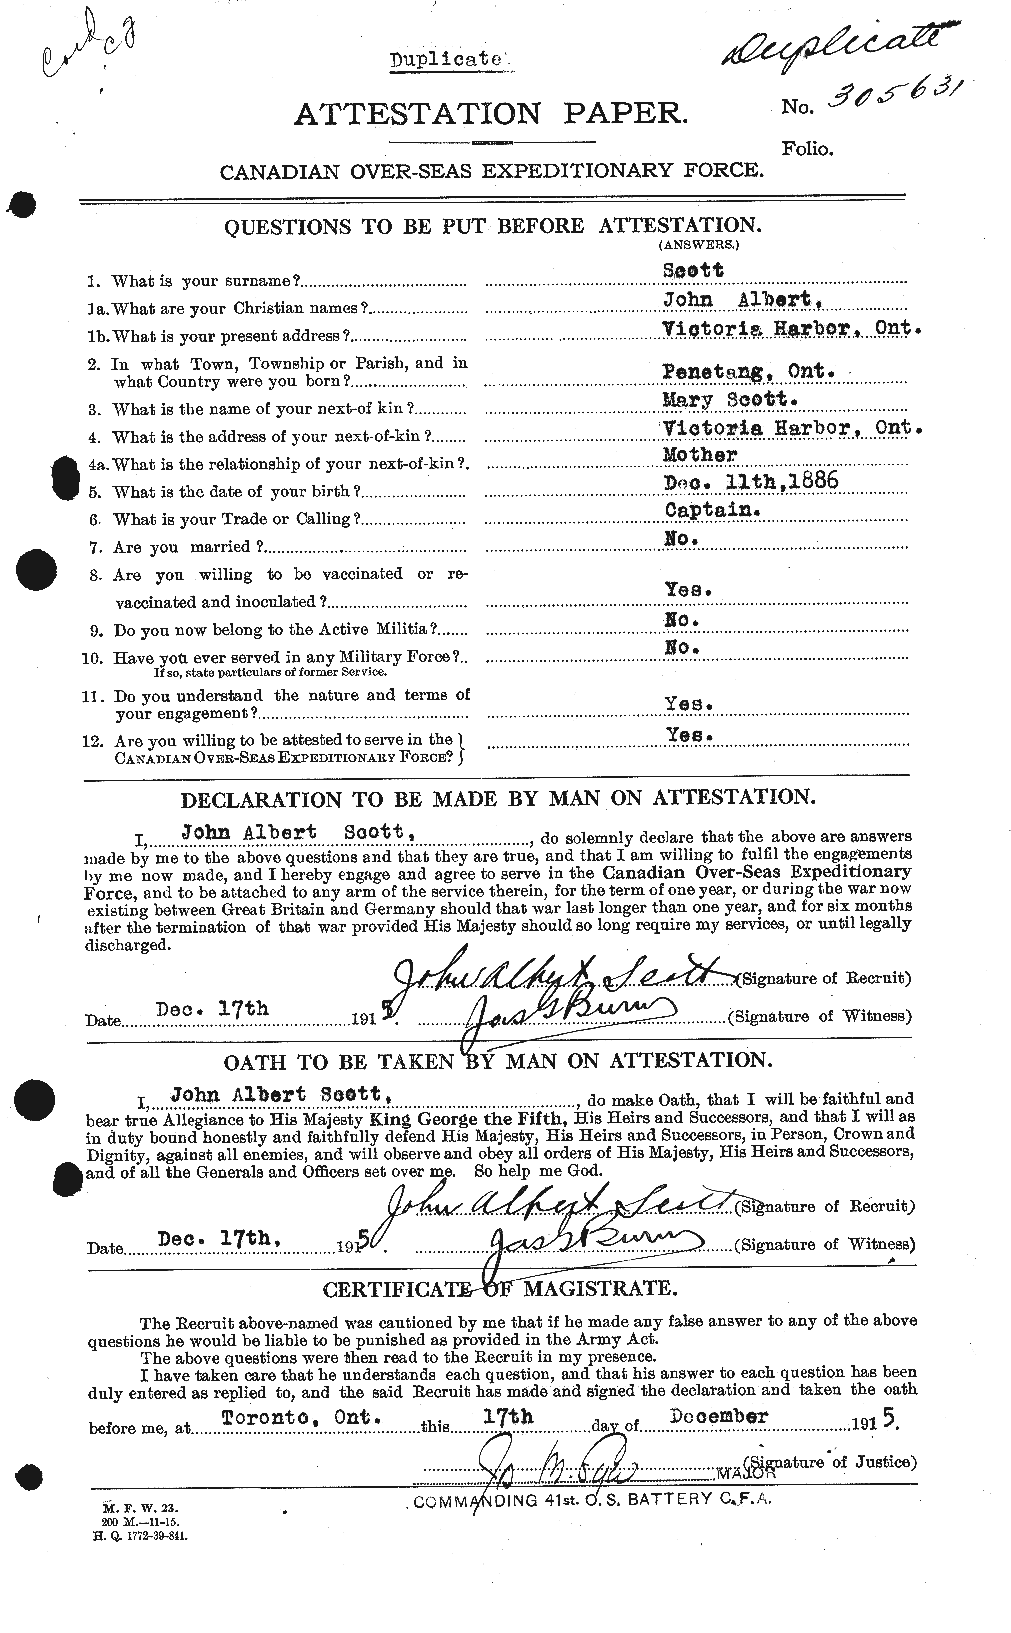 Personnel Records of the First World War - CEF 084669a